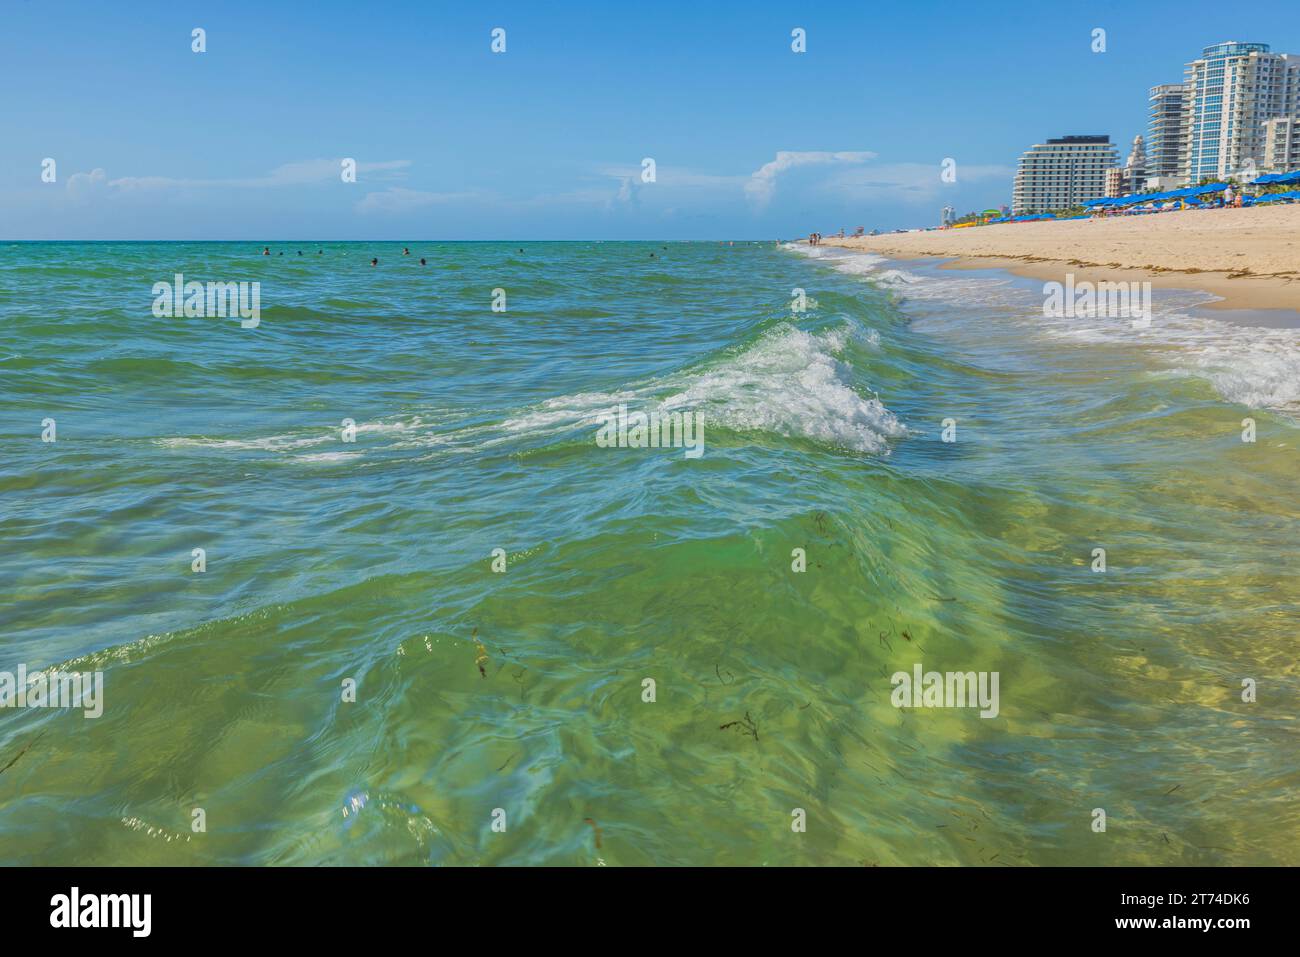 View of shoreline with architectural buildings under blue sky on horizon accompanied by gentle waves rolling onto sandy beach. Miami Beach, Florida, Stock Photo